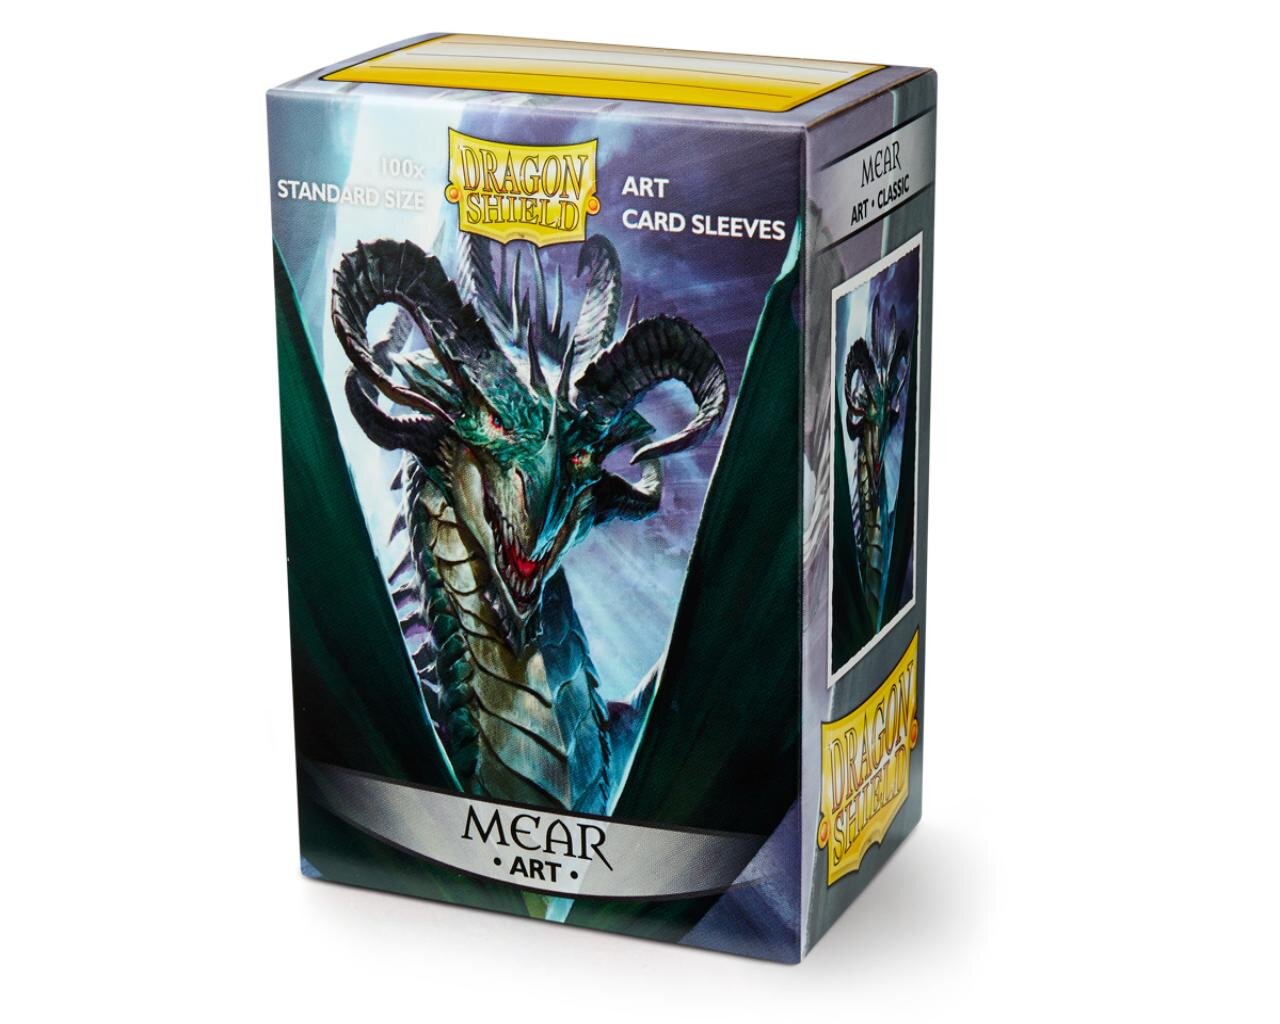 Dragon Shield New MEAR Art Classic Card Sleeves Deck Protectors 100 count Sealed 